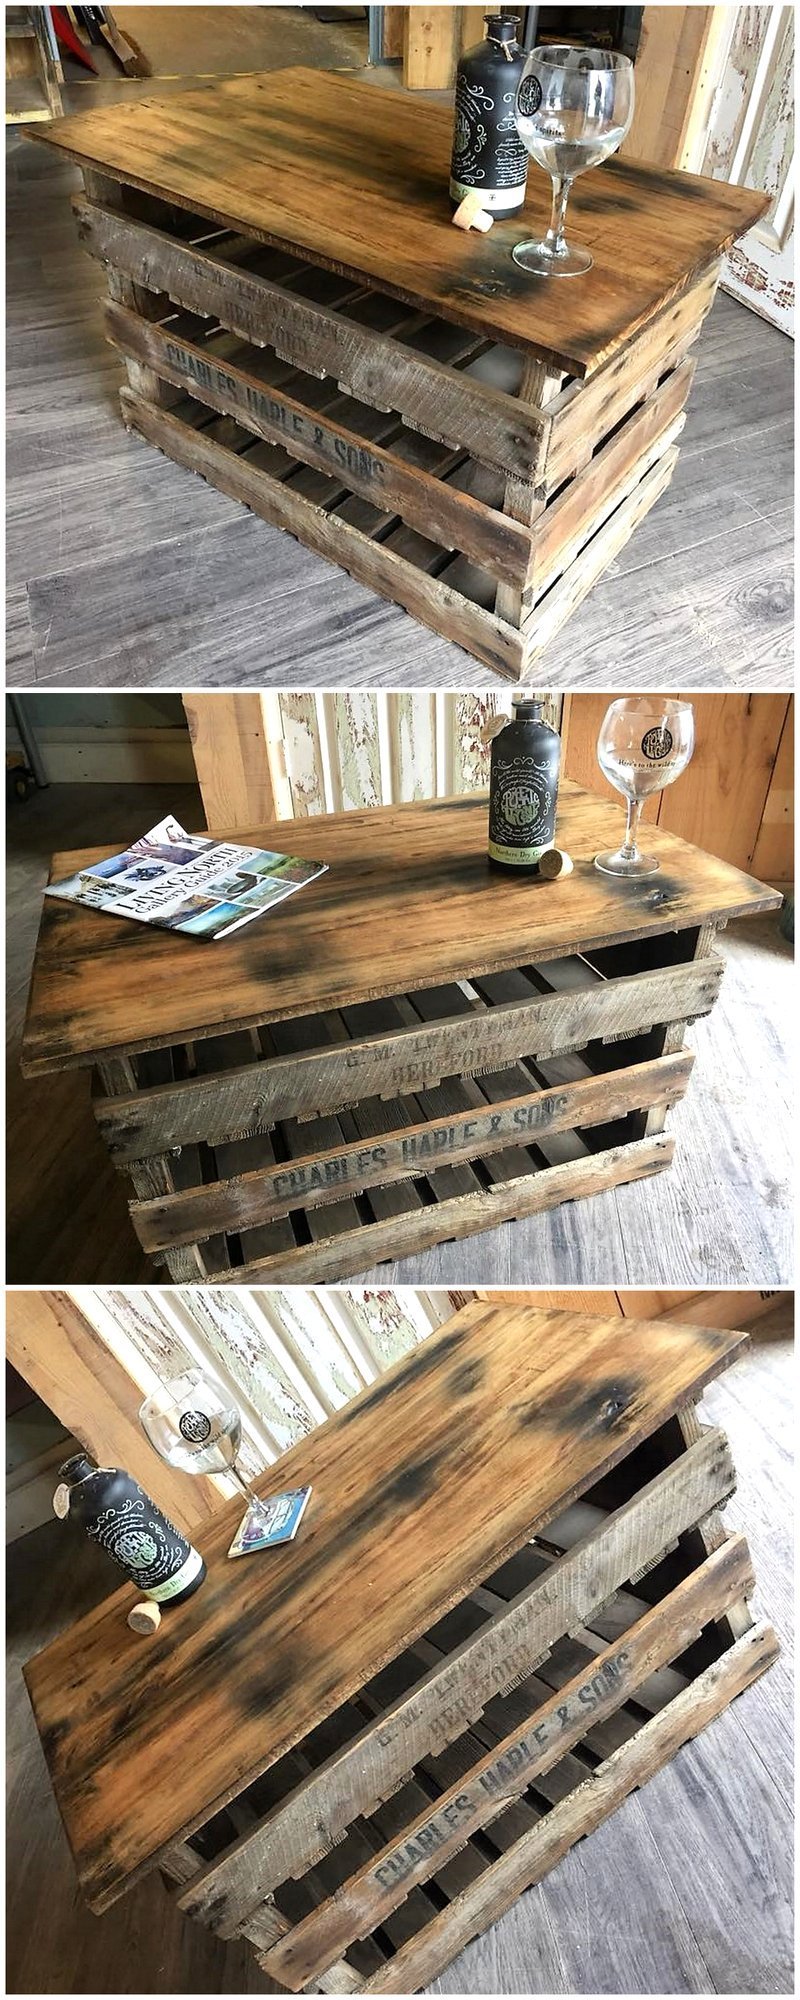 Rustic Pallet Wood Ideas and Projects | Rustic Home Decor ...